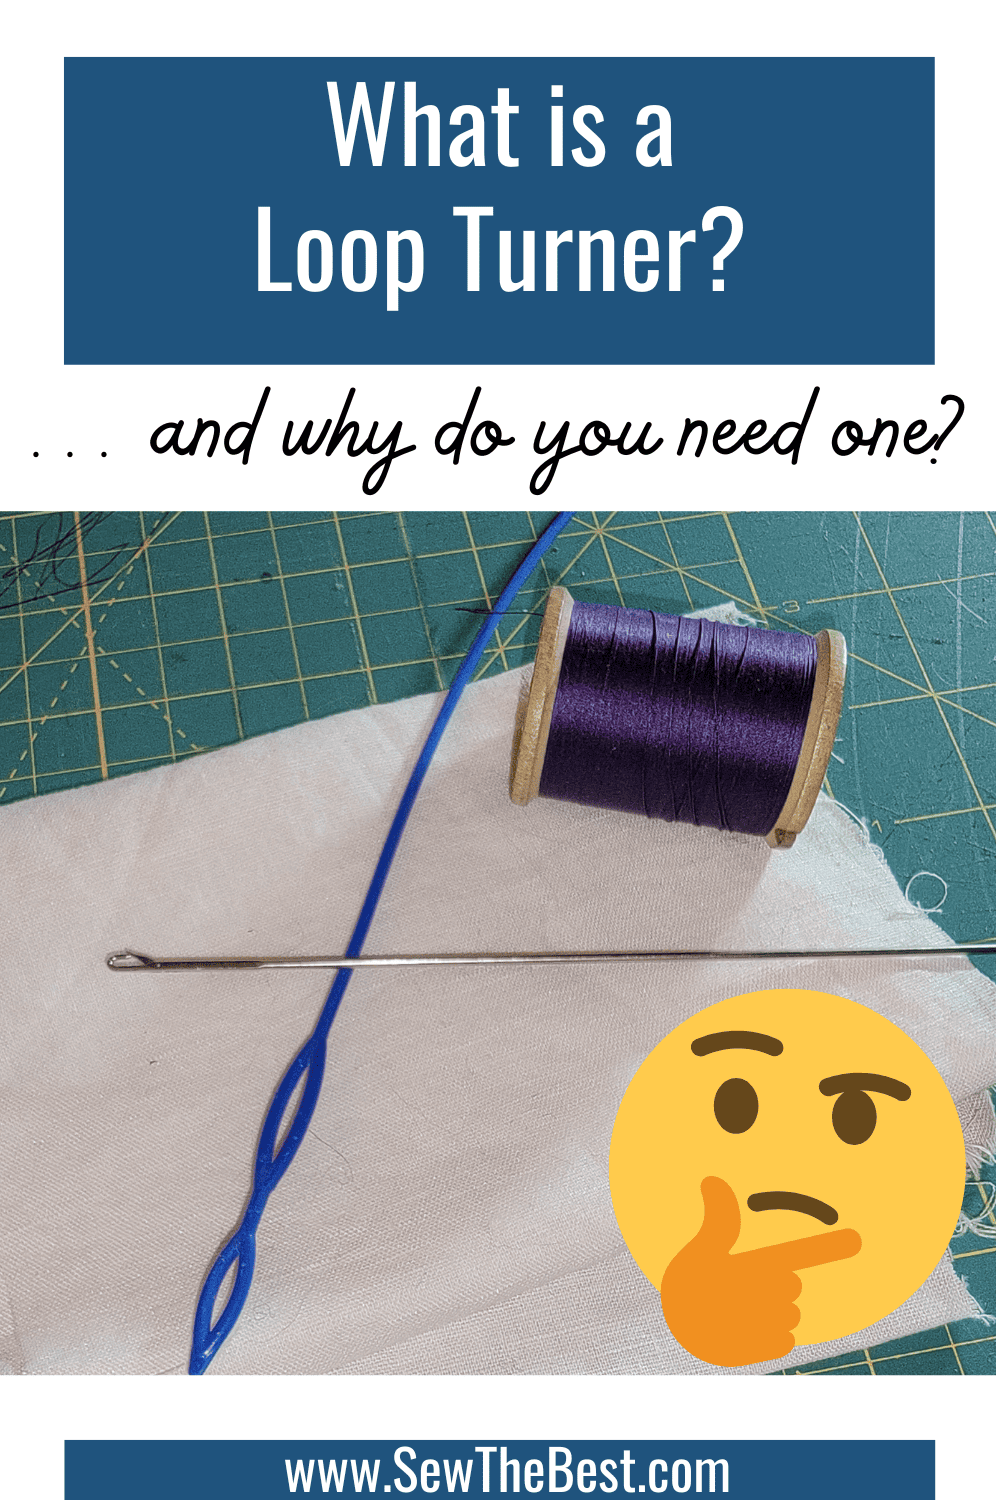 What is a Loop Turner? ... and why do you need one? Picture of a spool of purple thread, blue bodkin, and a loop turner on white fabric follow.